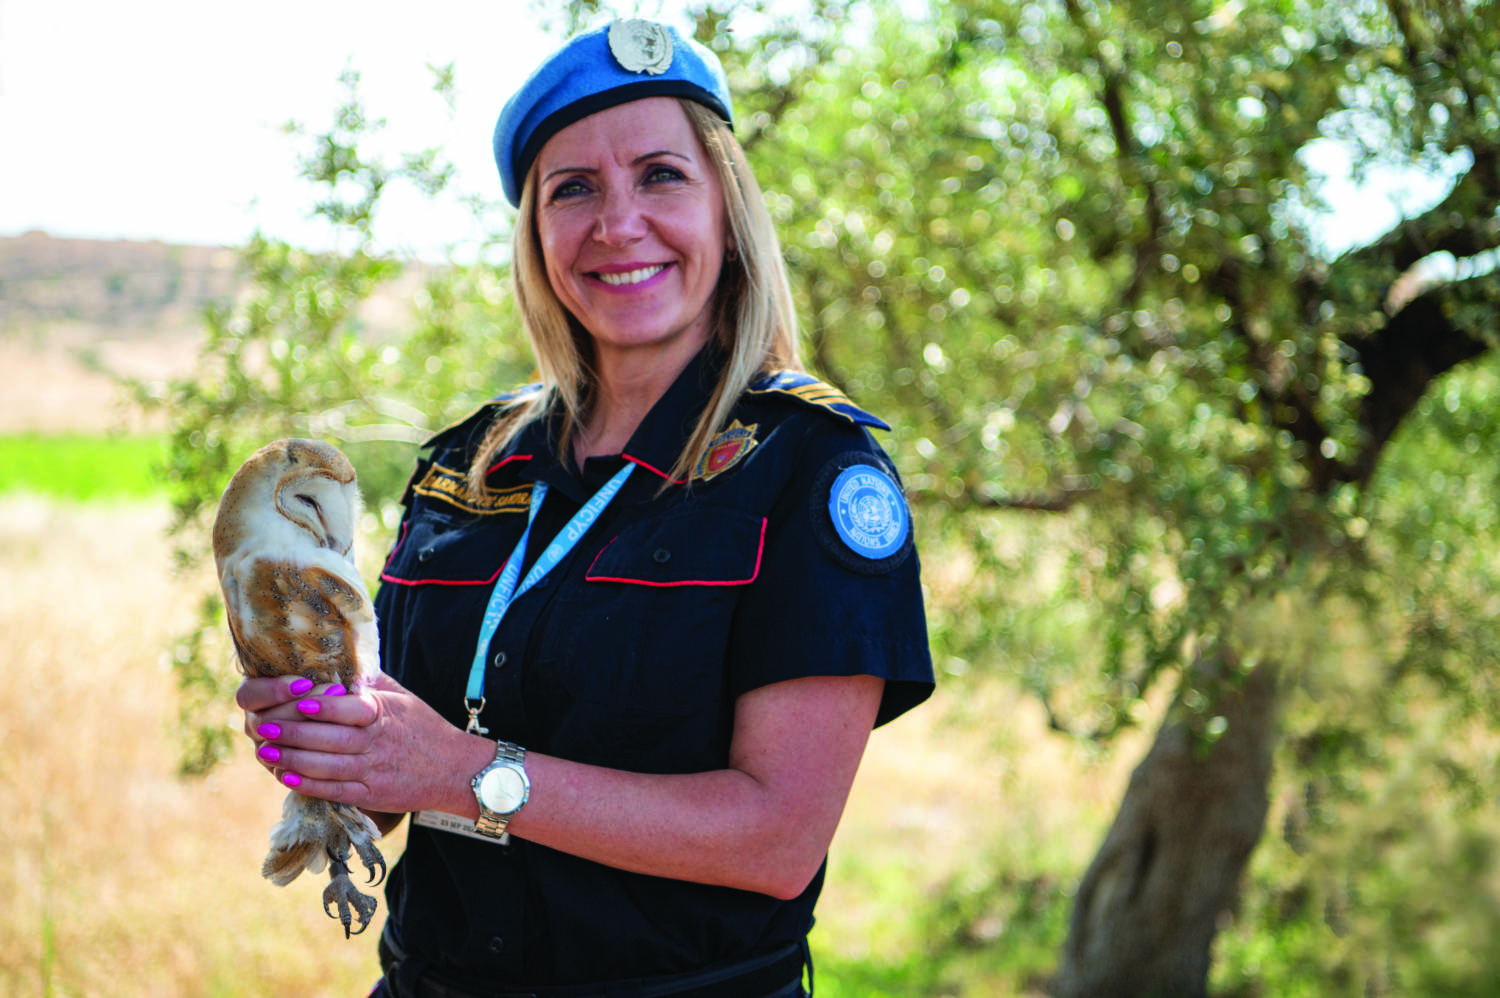 Unpol Peacekeepers Supporting The Barn Owl Nesting Project With The Game And Fauna Services Inside The Un Buffer Zone